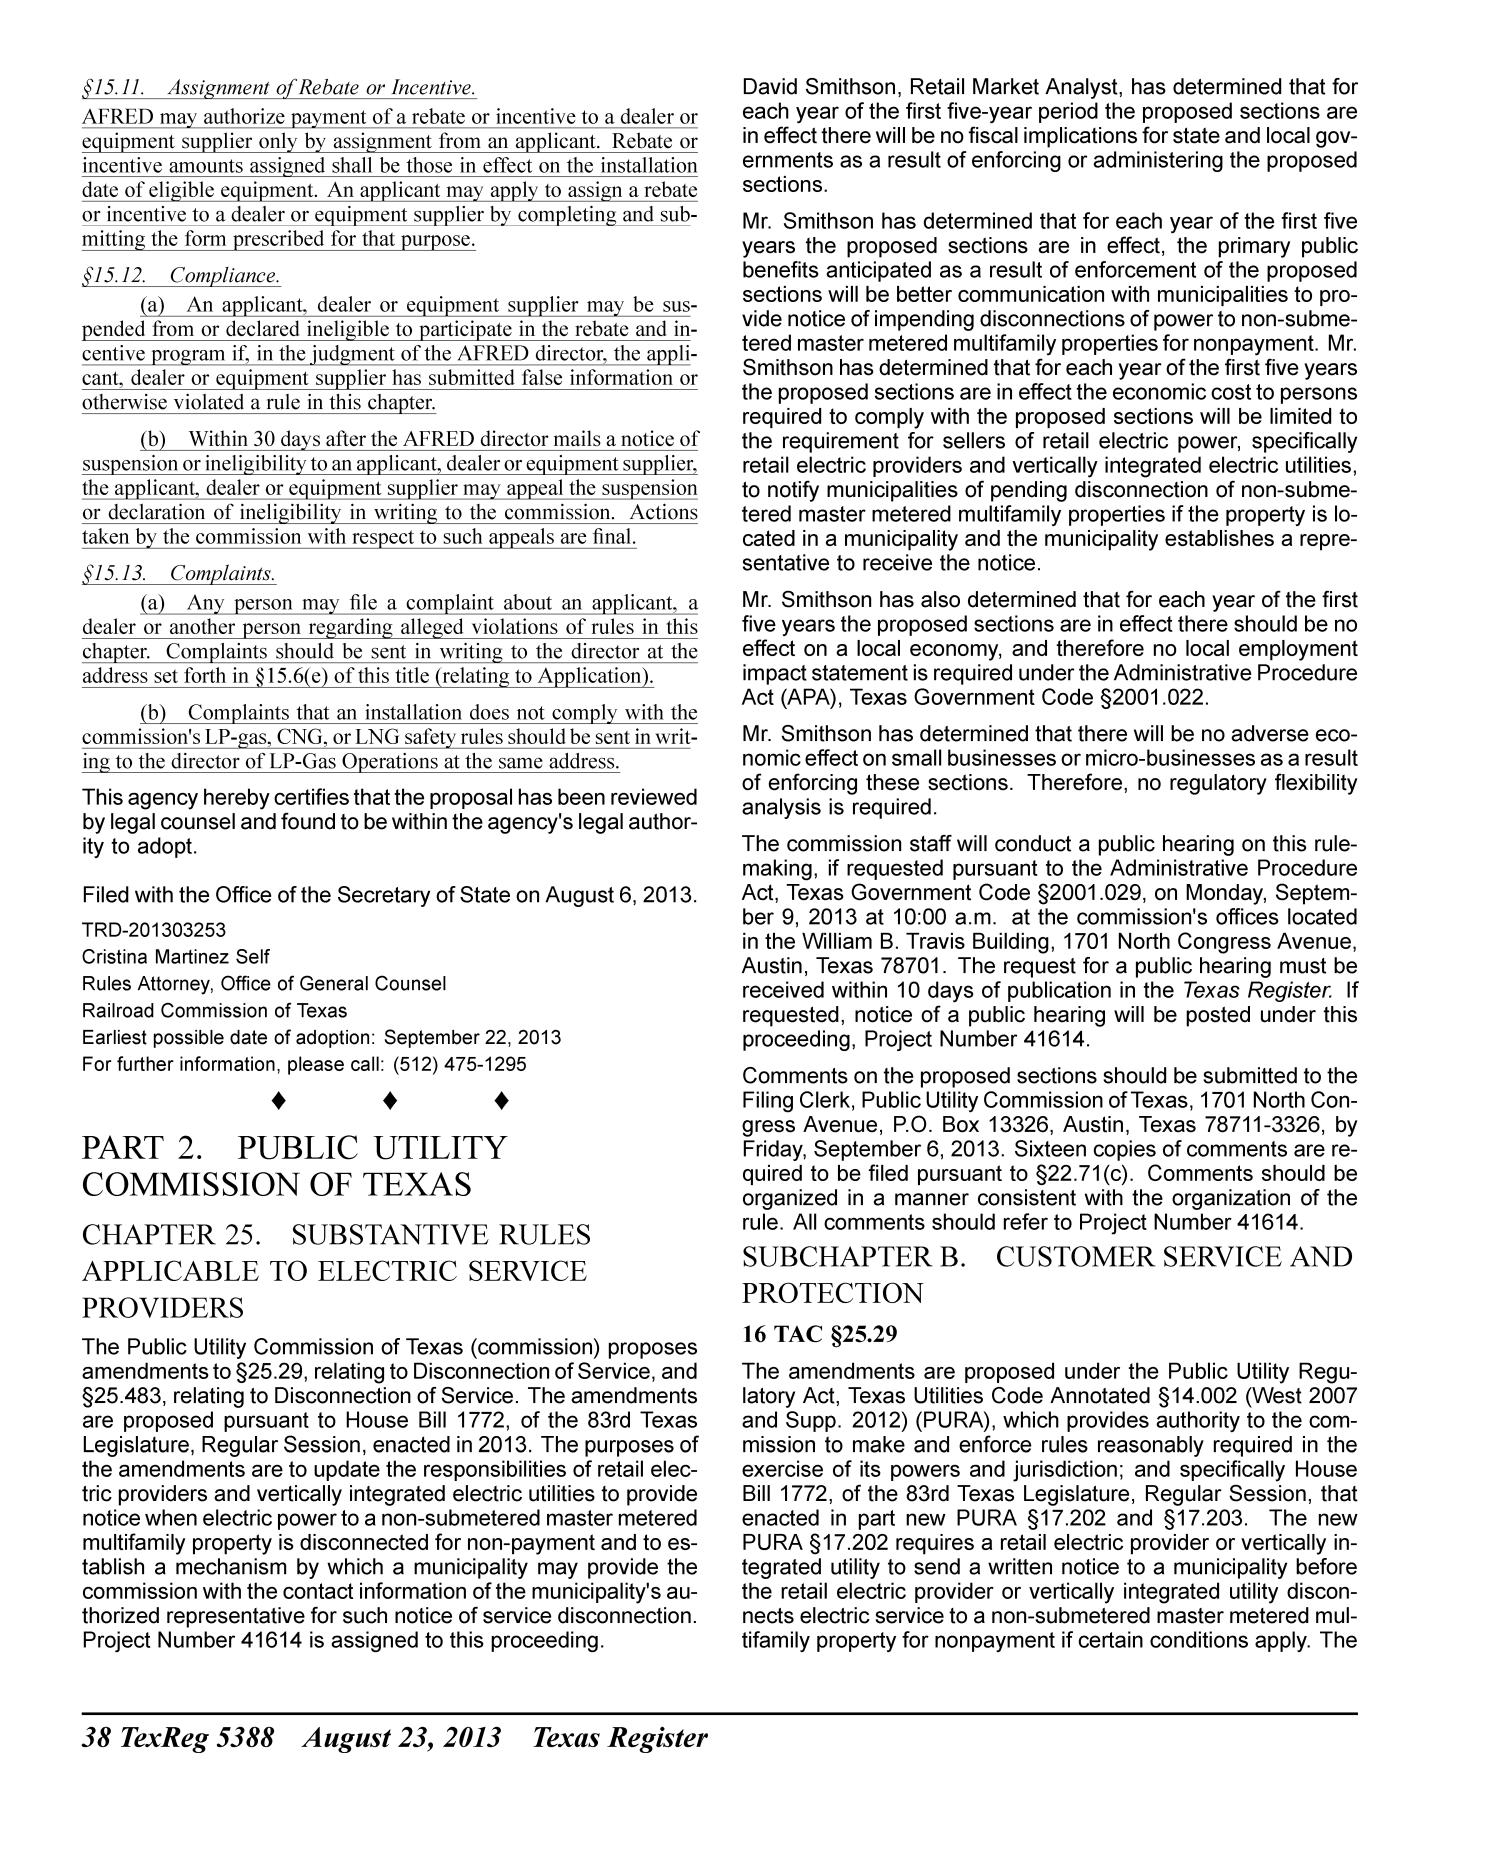 Texas Register, Volume 38, Number 34, Pages 5371-5484, August 23, 2013
                                                
                                                    5388
                                                